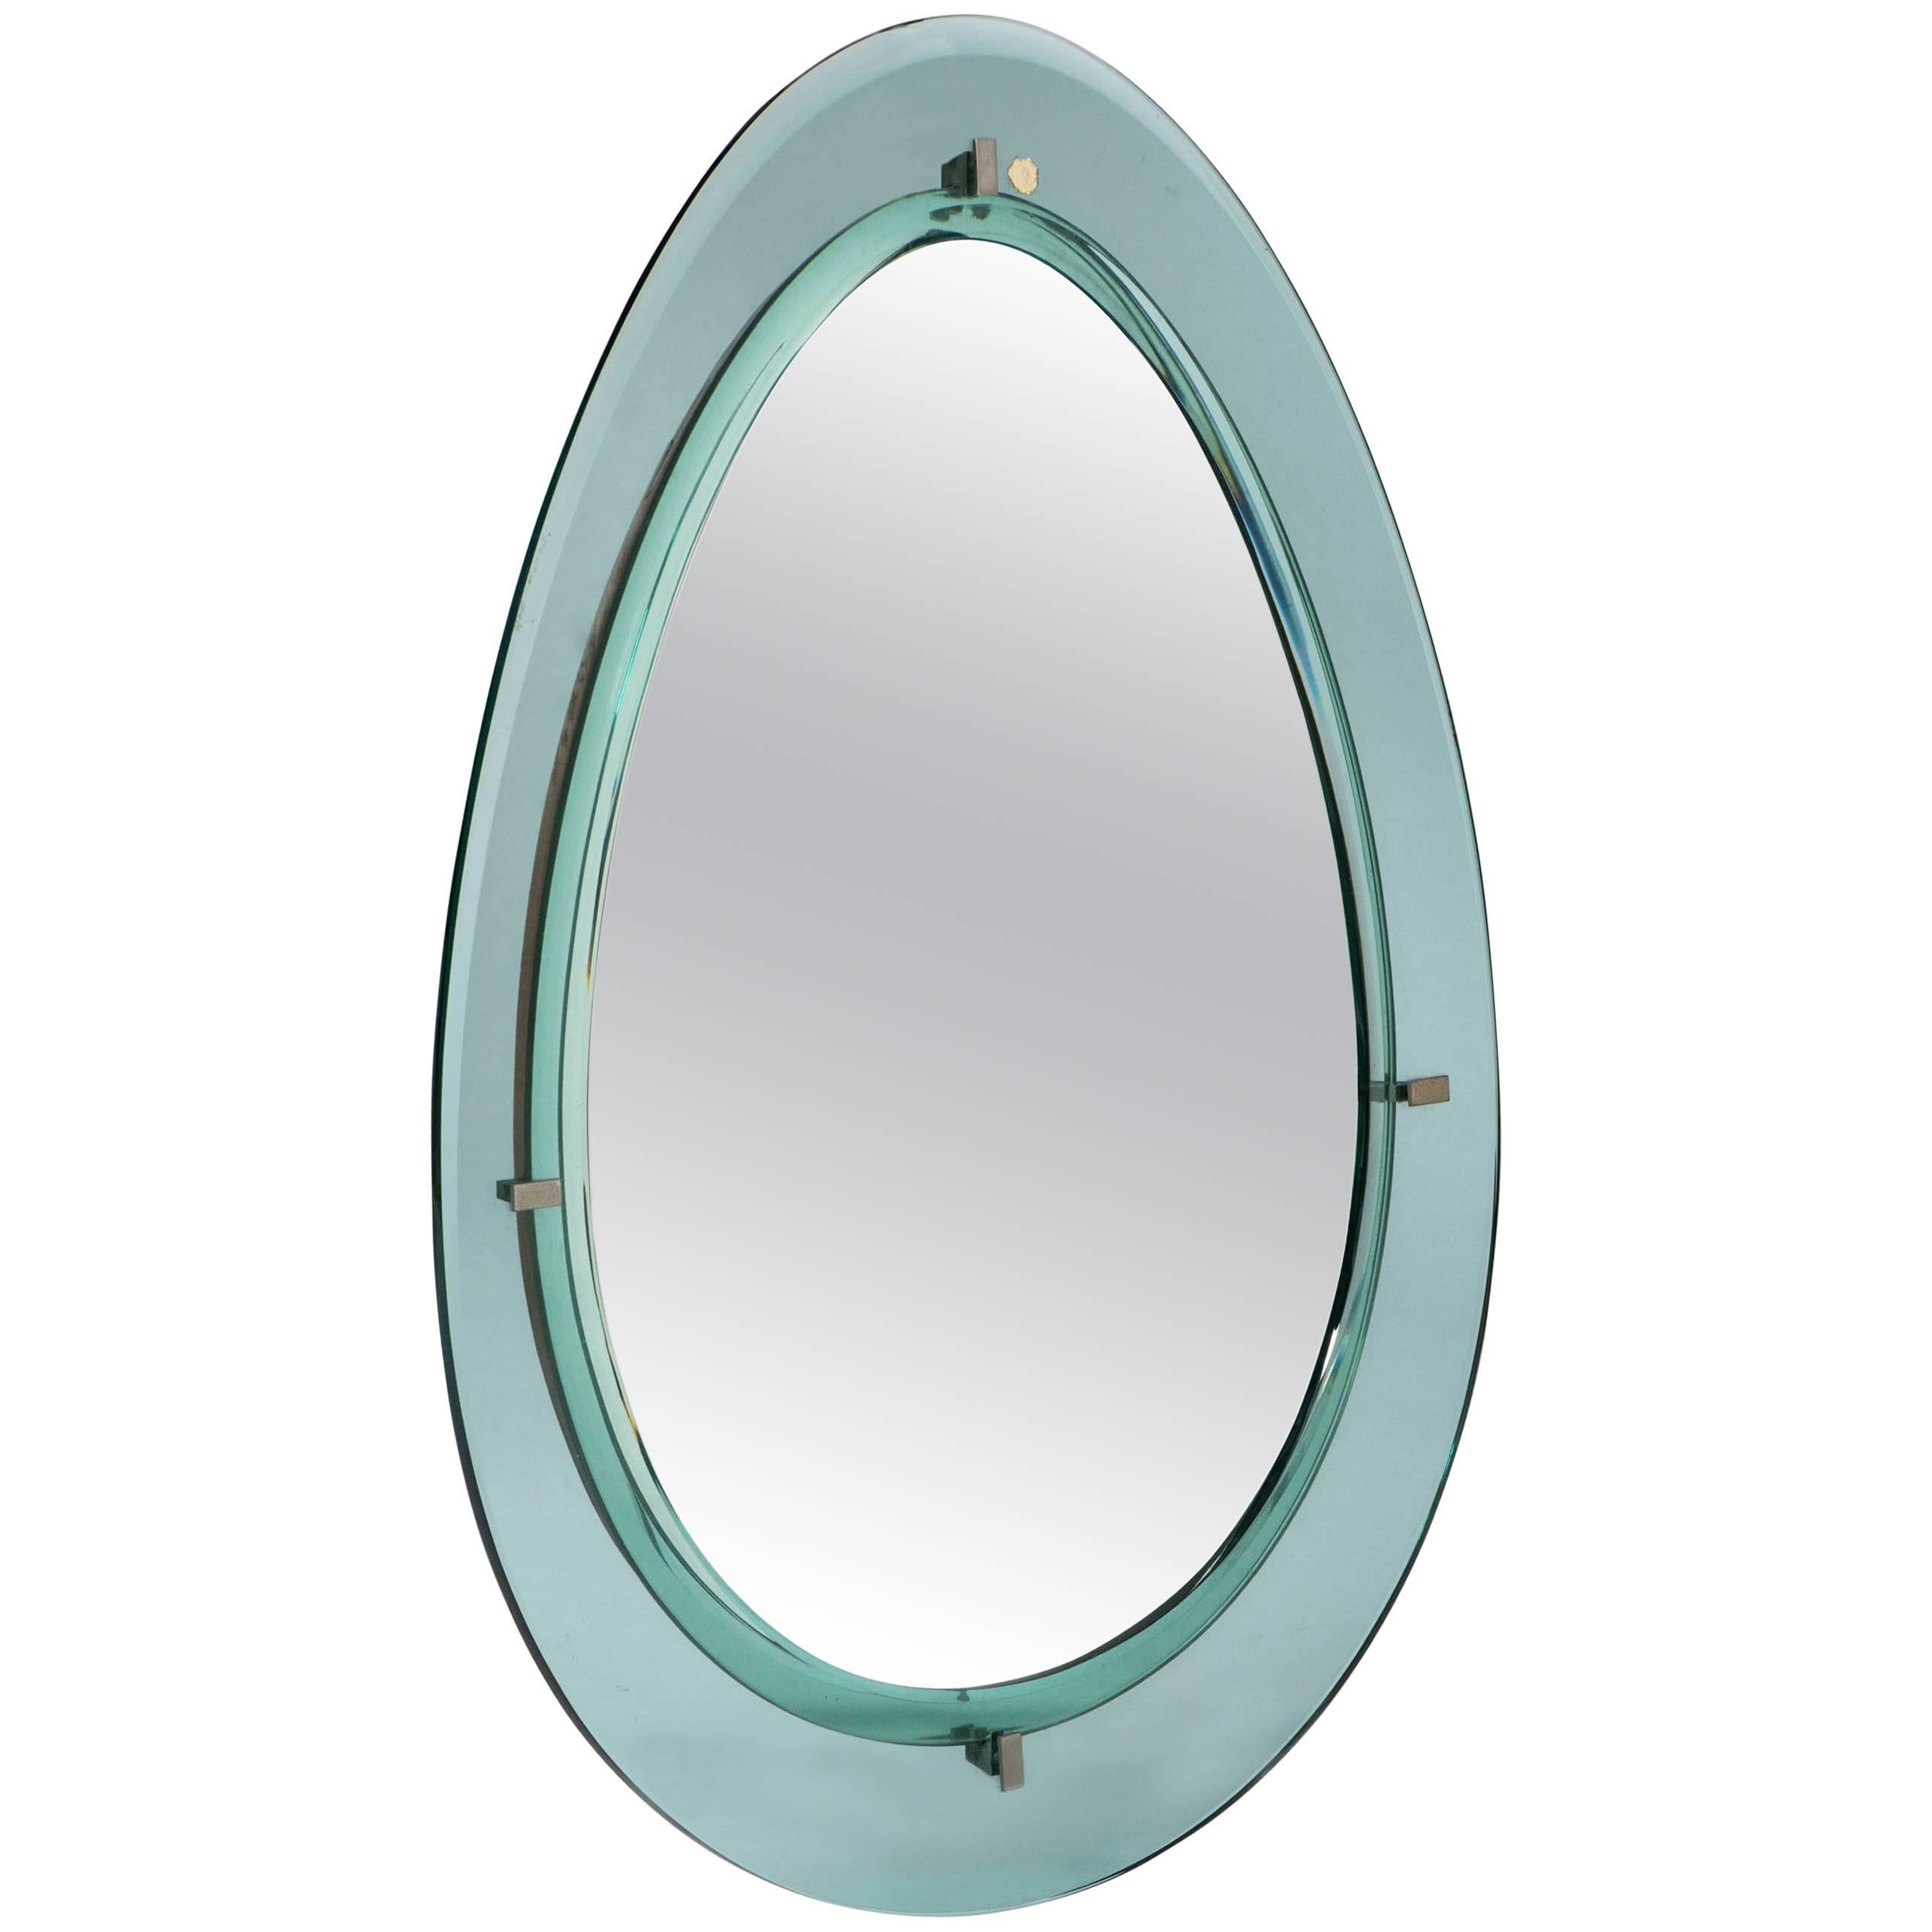 Cristal Art oval wall mirror with double glass border, Italy circa 1960 For Sale